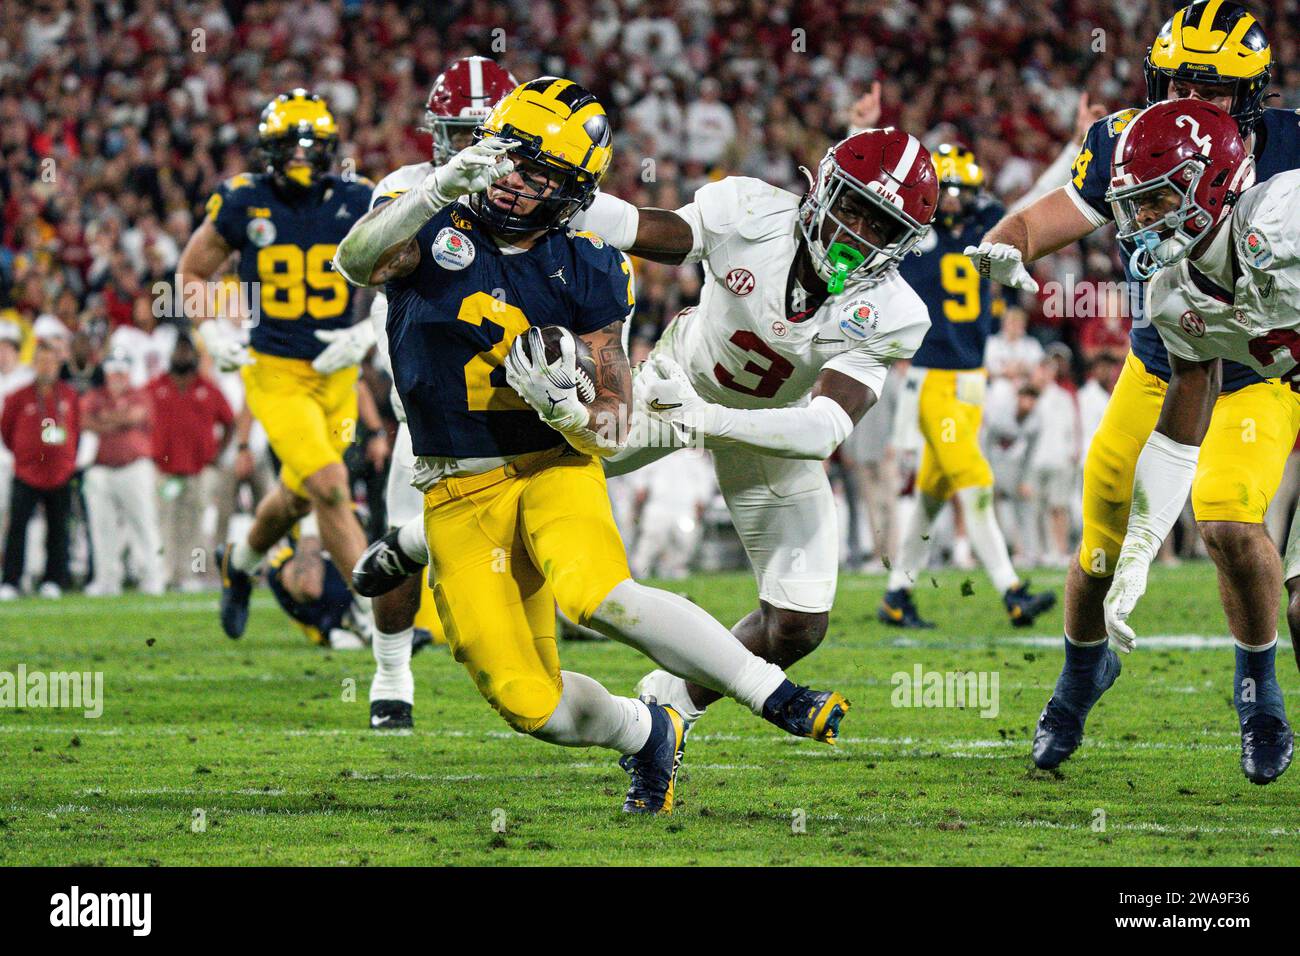 Michigan Wolverines running back Blake Corum (2) runs the ball for the winning touchdown during overtime of the CFP Semifinal at the Rose Bowl Game ag Stock Photo